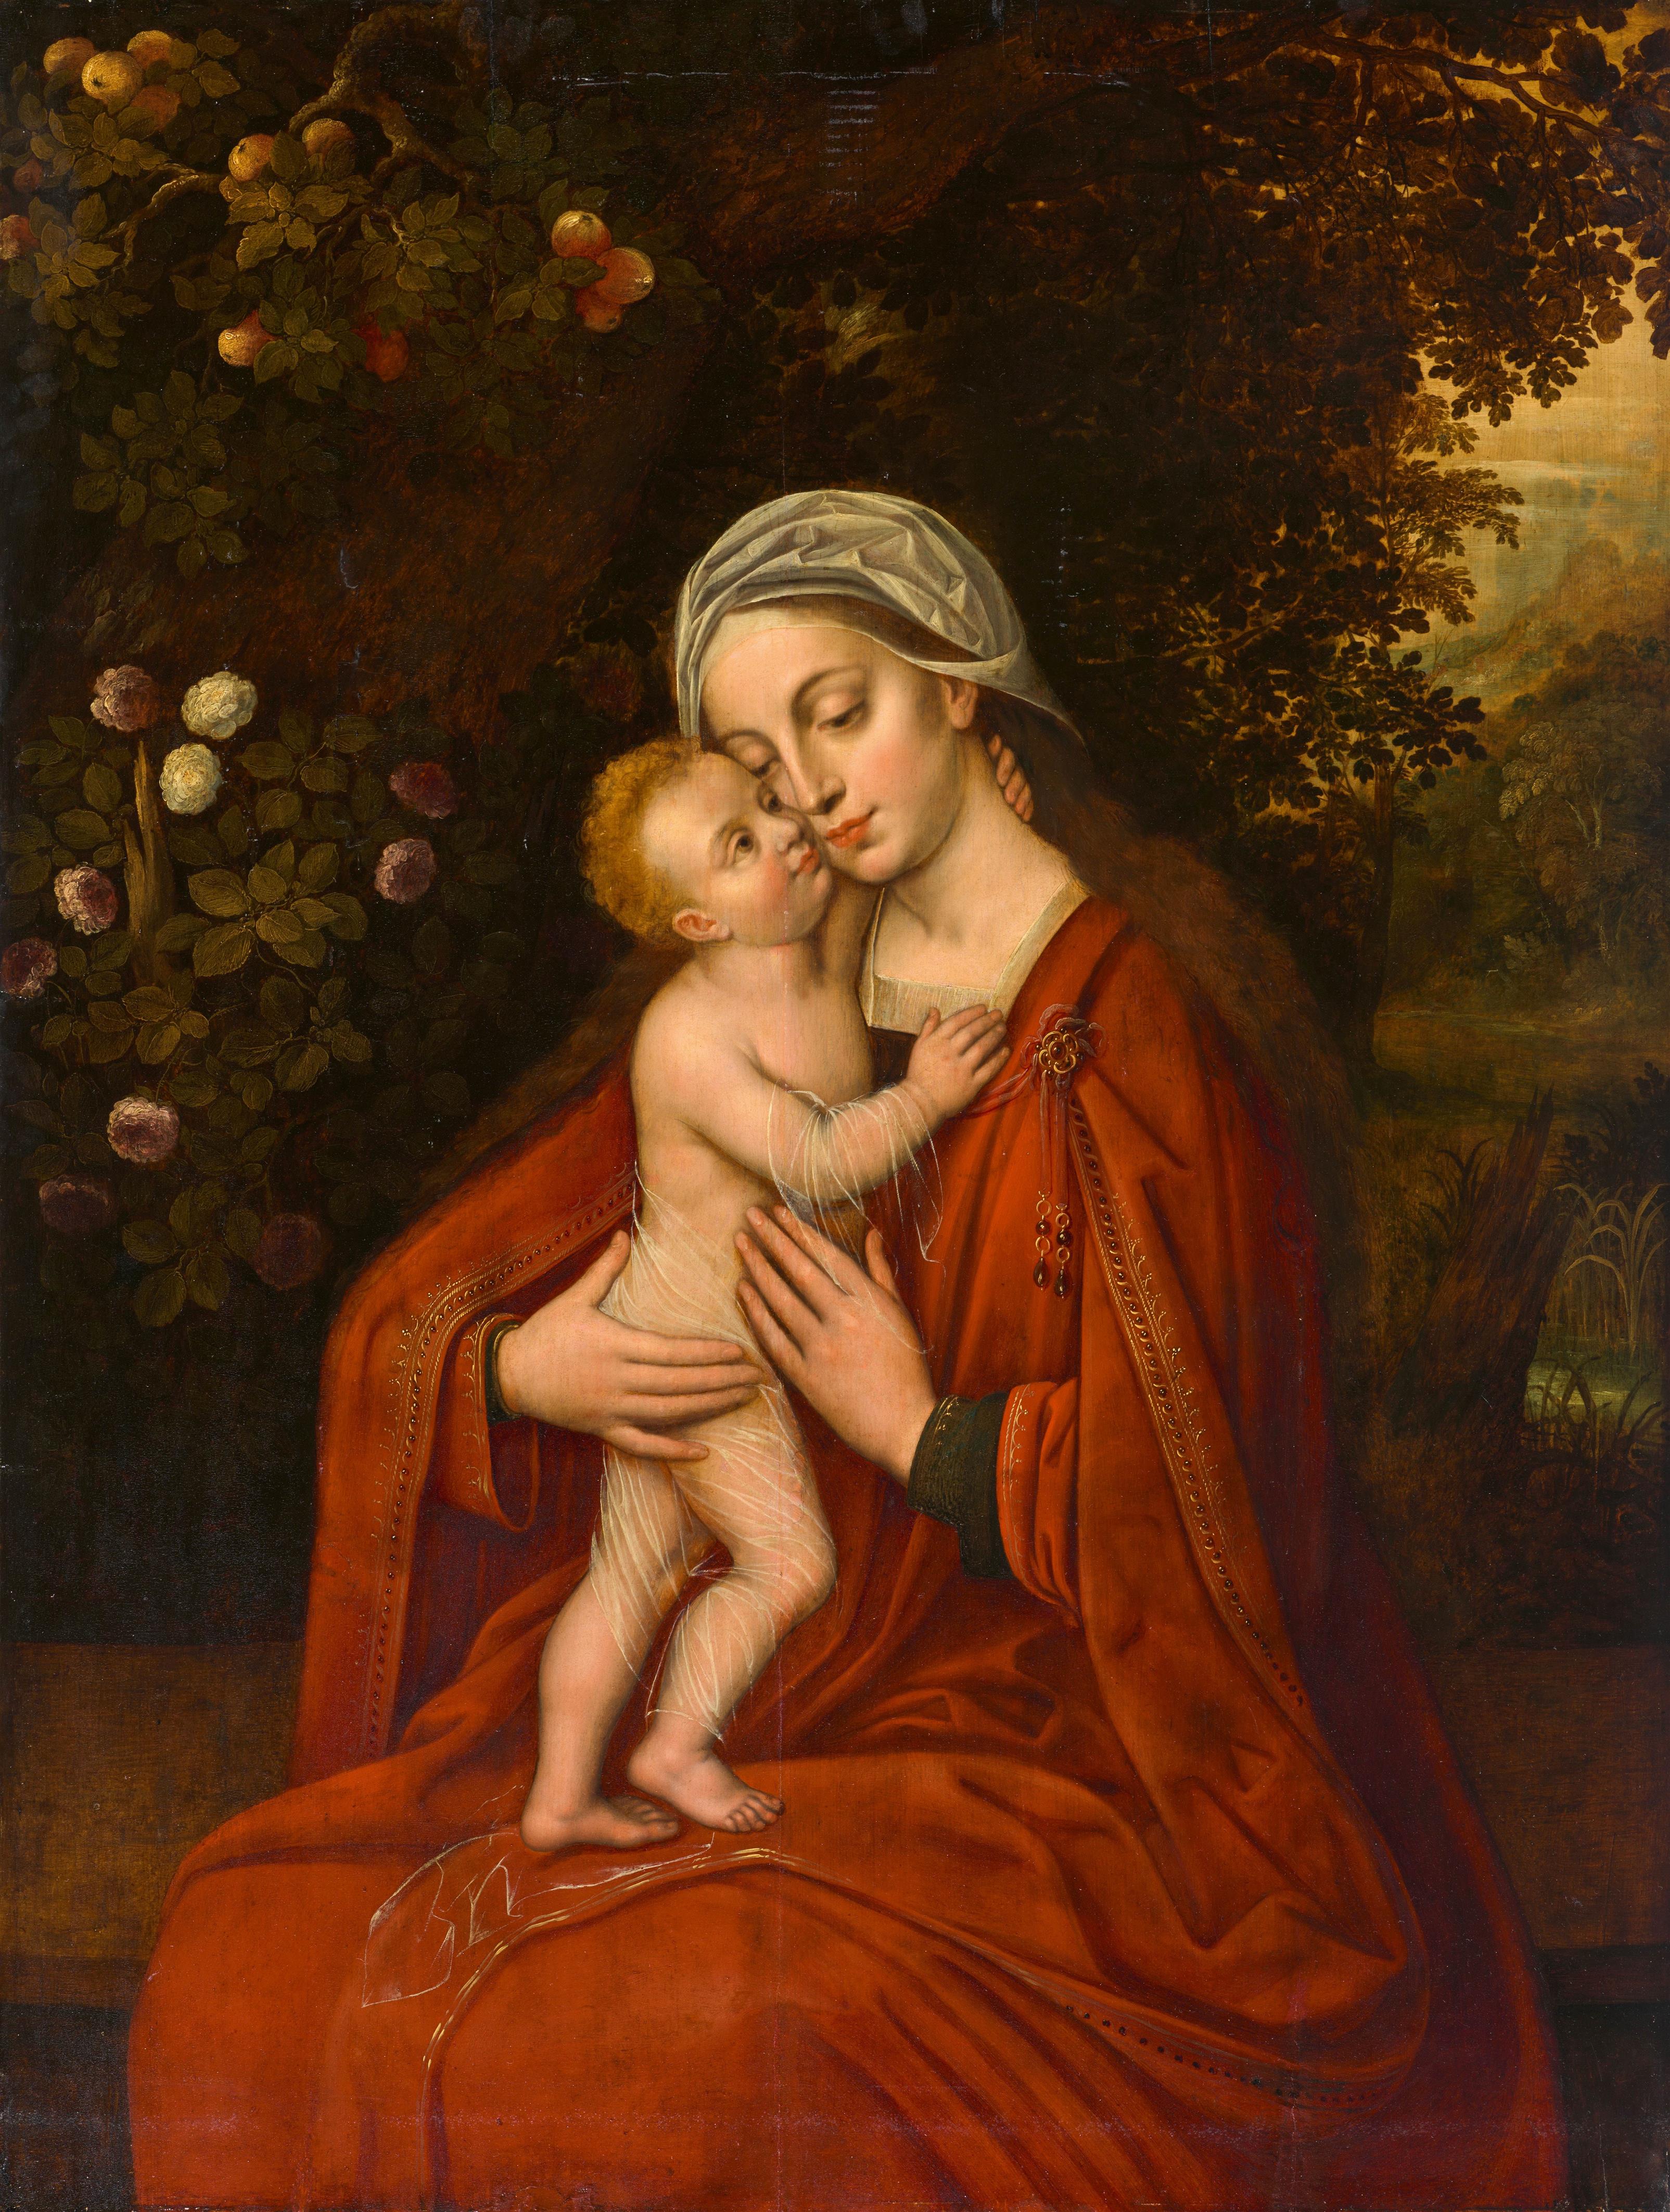 Bruges School second half 16th century - Madonna embraced by the Christ Child in front of a Rose Bush - image-1